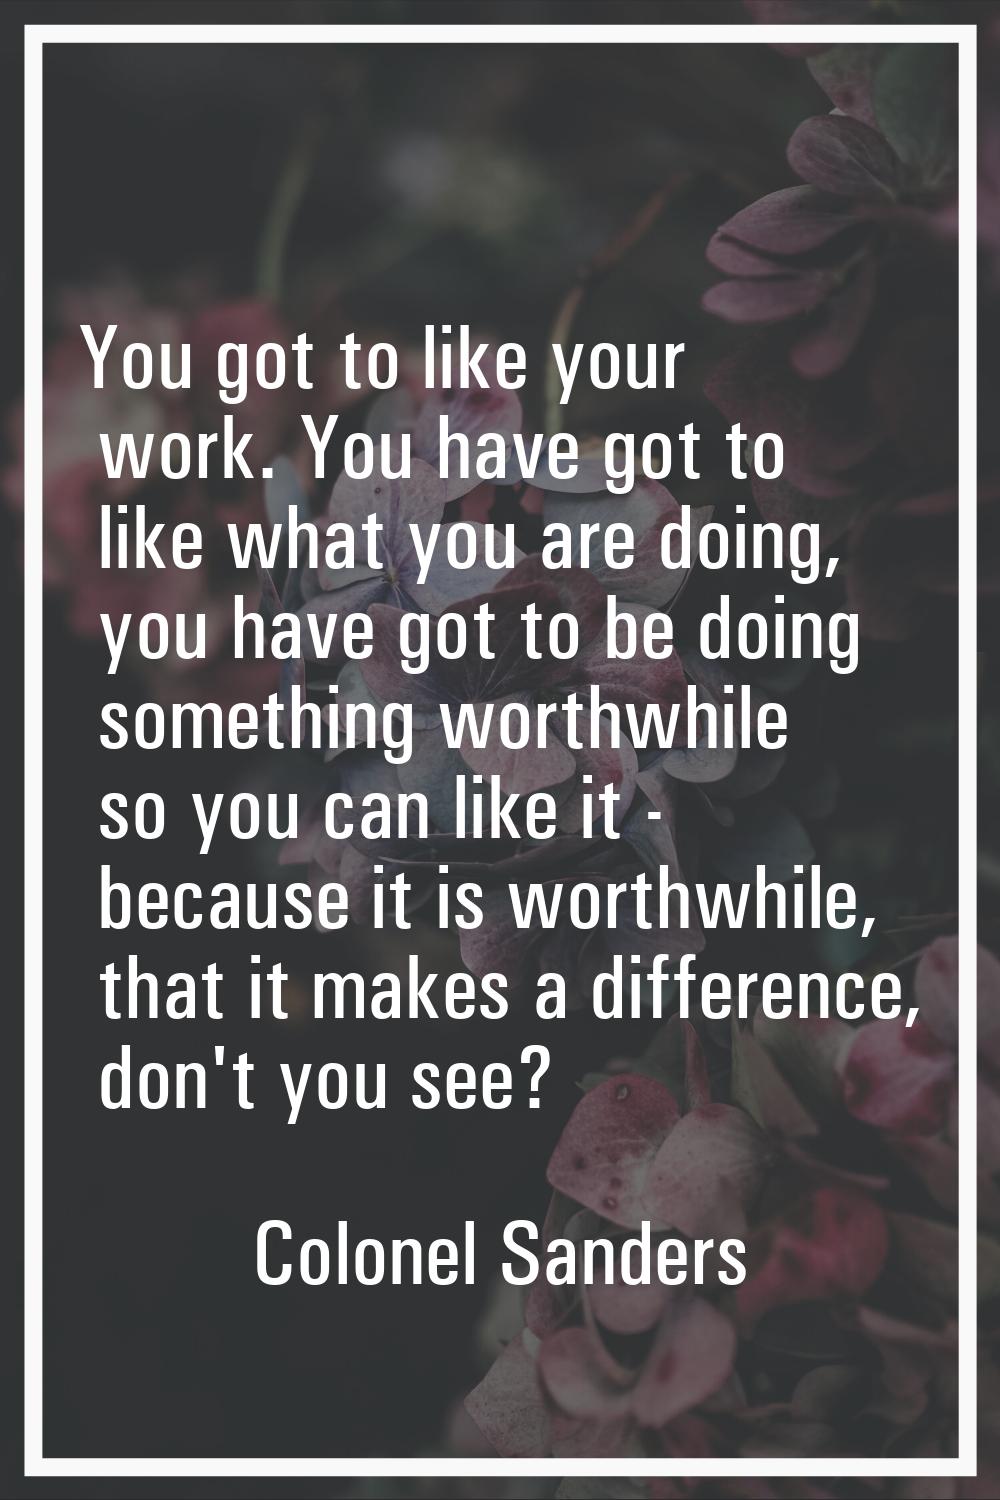 You got to like your work. You have got to like what you are doing, you have got to be doing someth